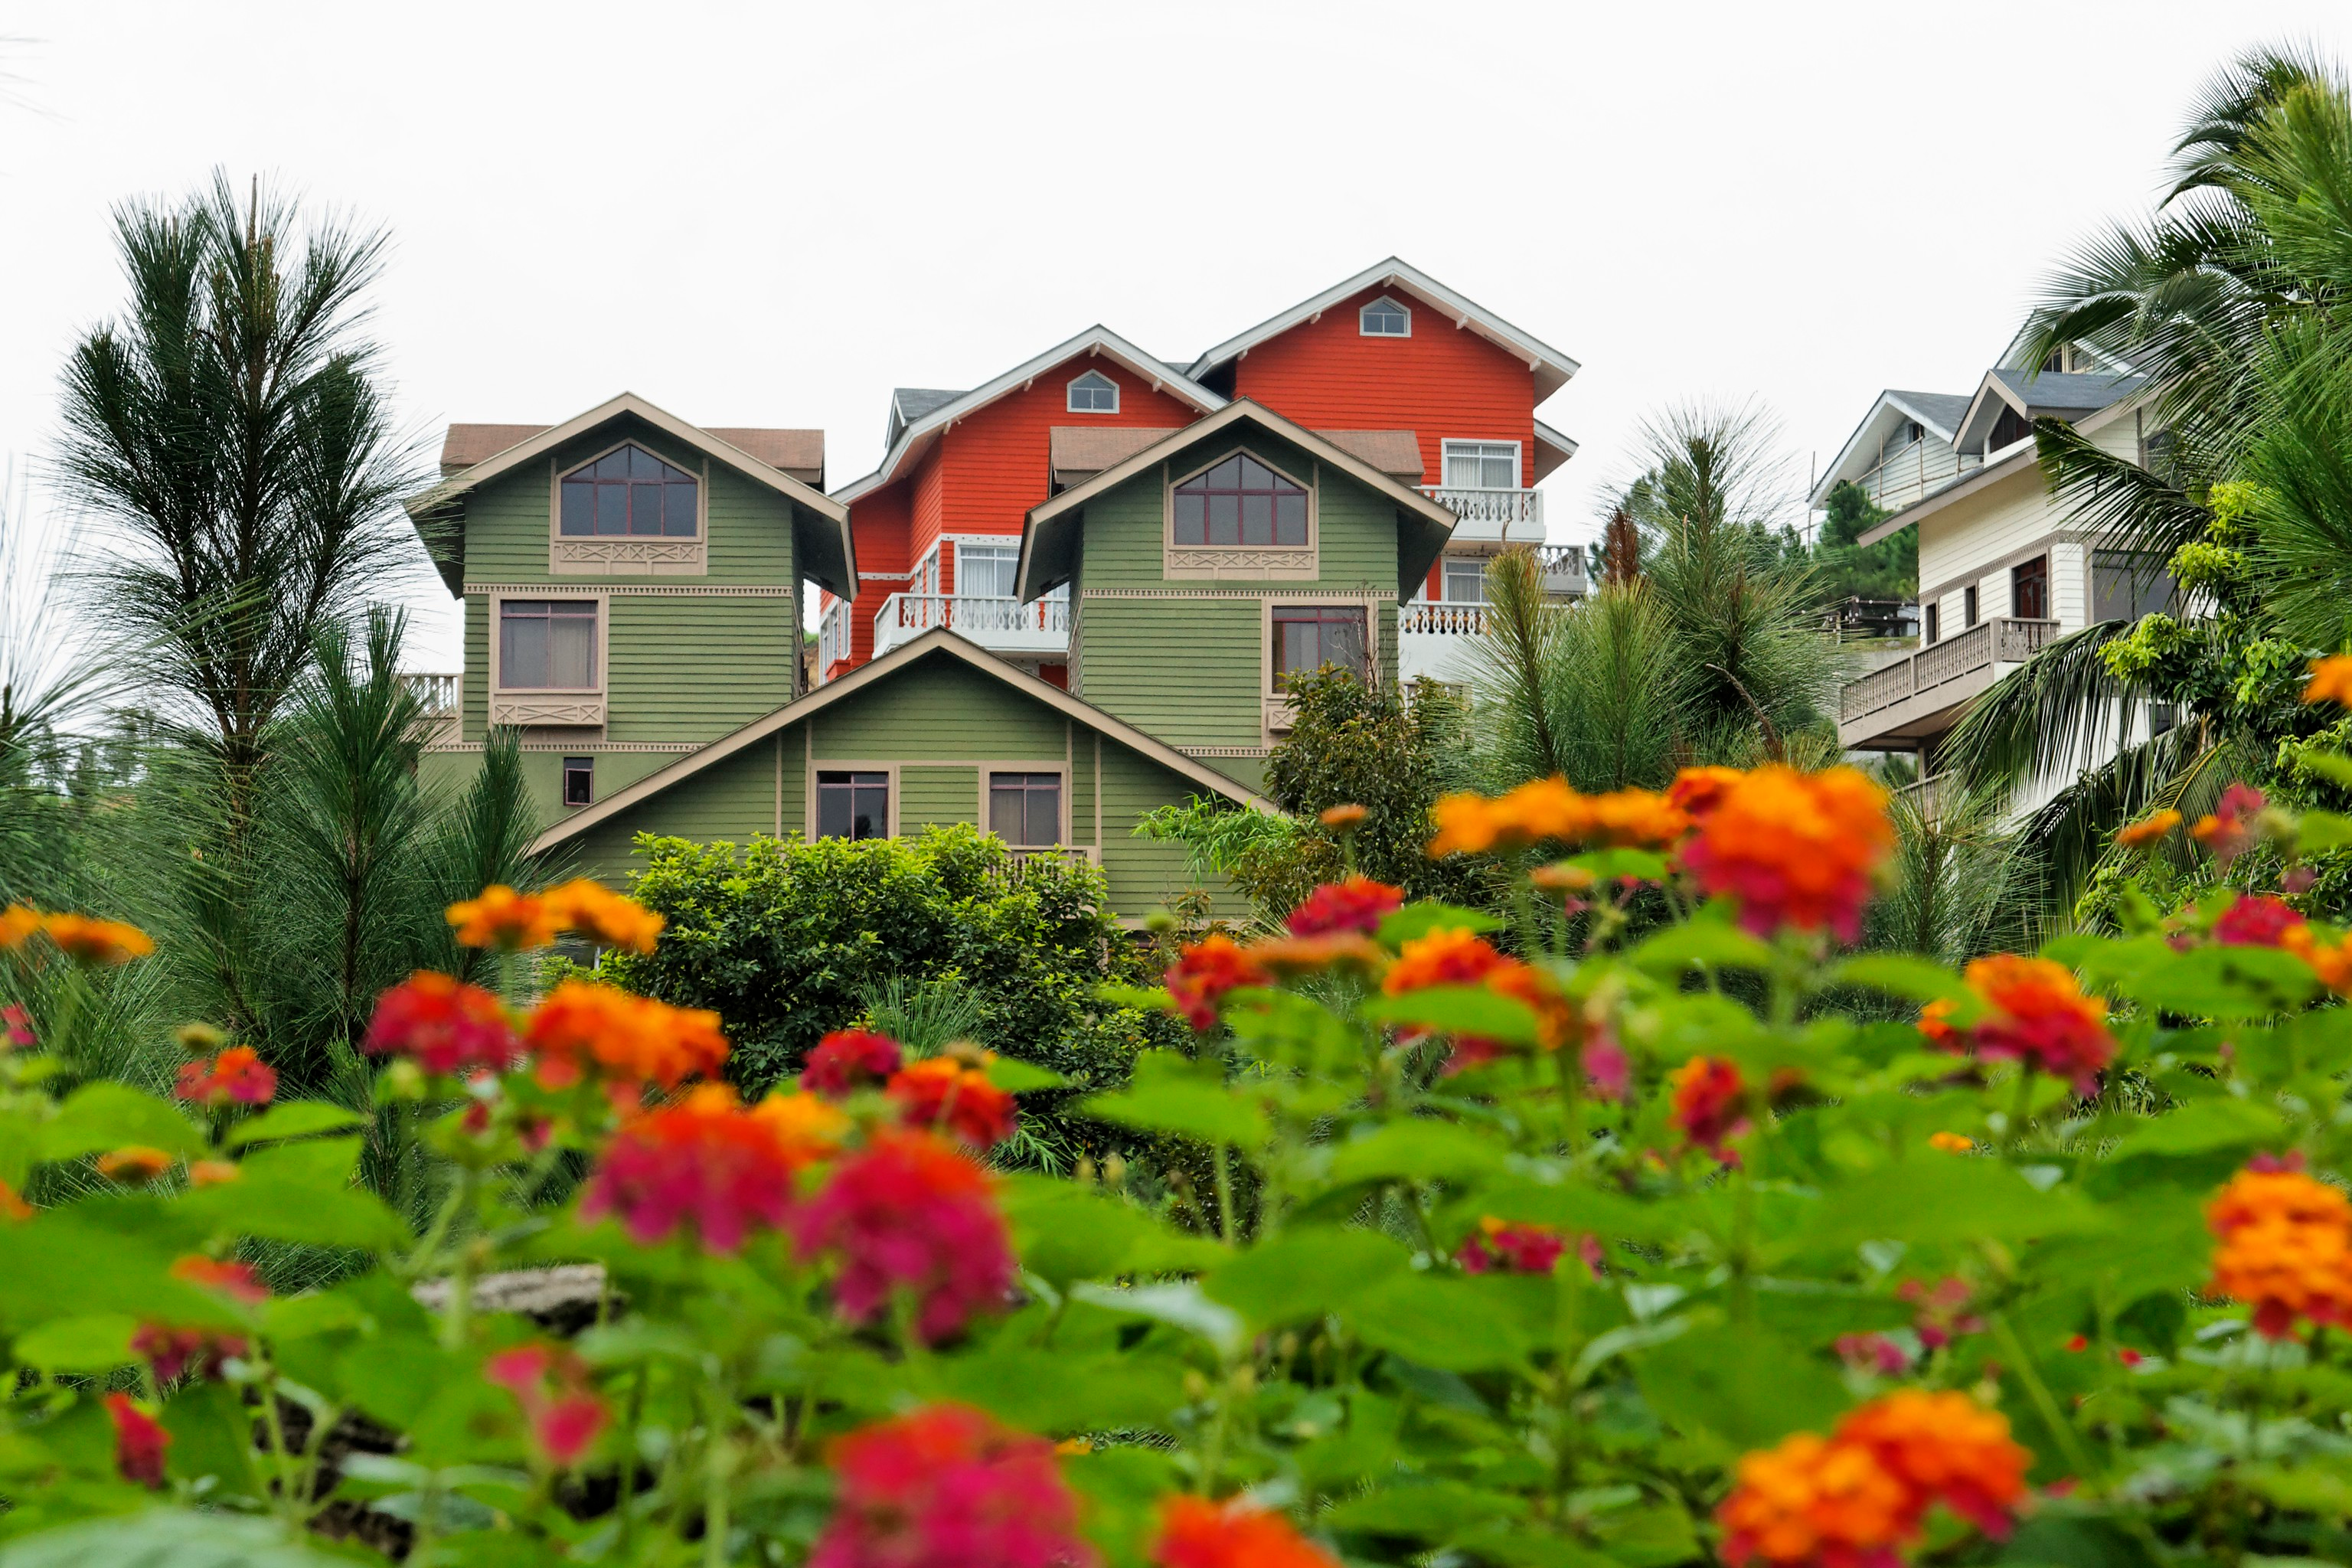 Brittany Corporation’s Crosswinds made use of Swiss chalets for the design of its luxury homes in Tagaytay and condo for sale